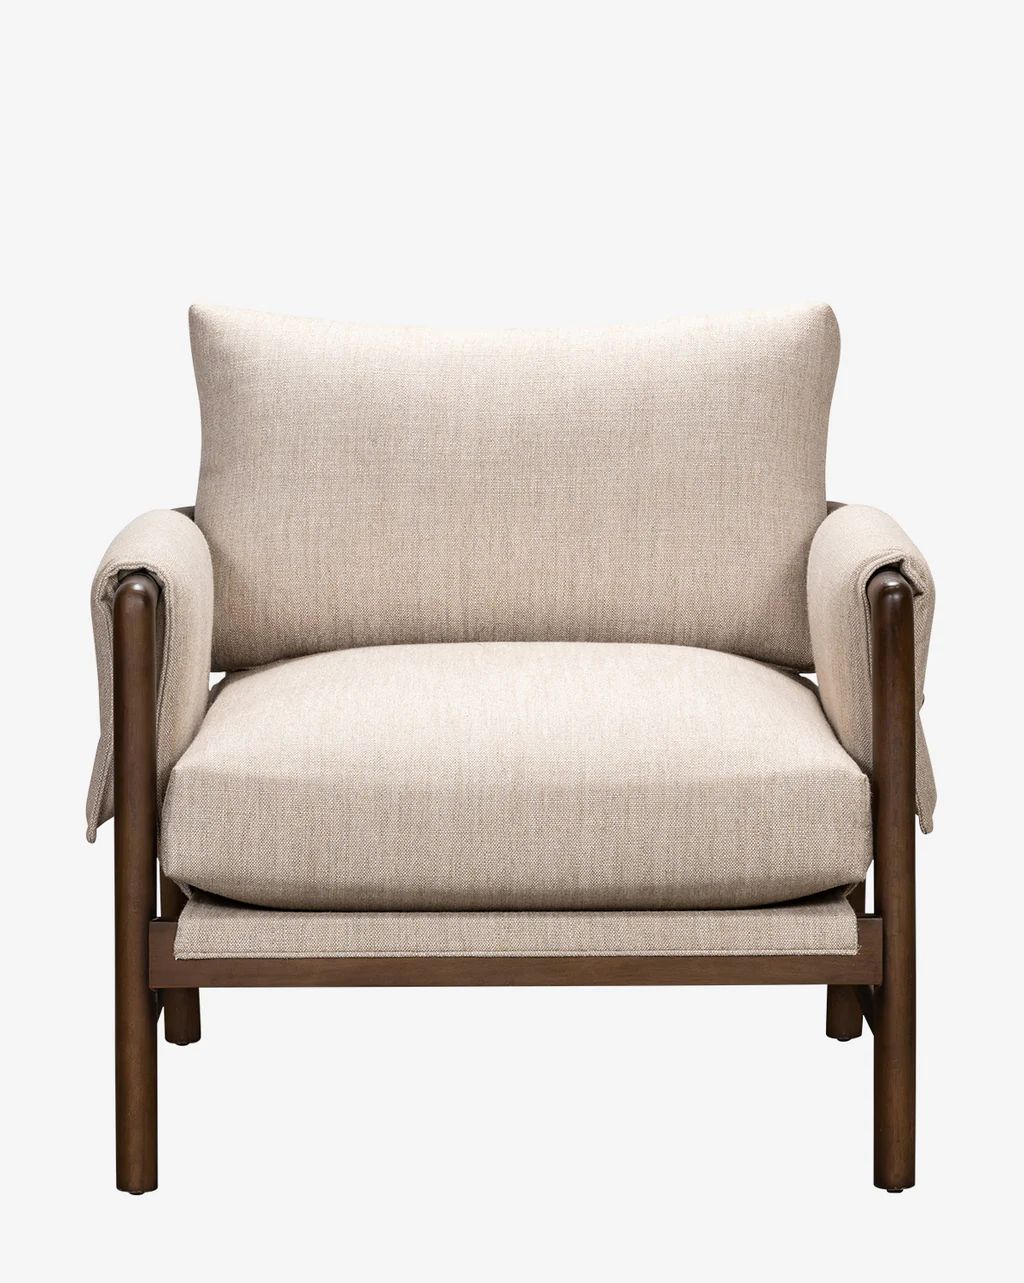 Demarco Lounge Chair | McGee & Co. (US)